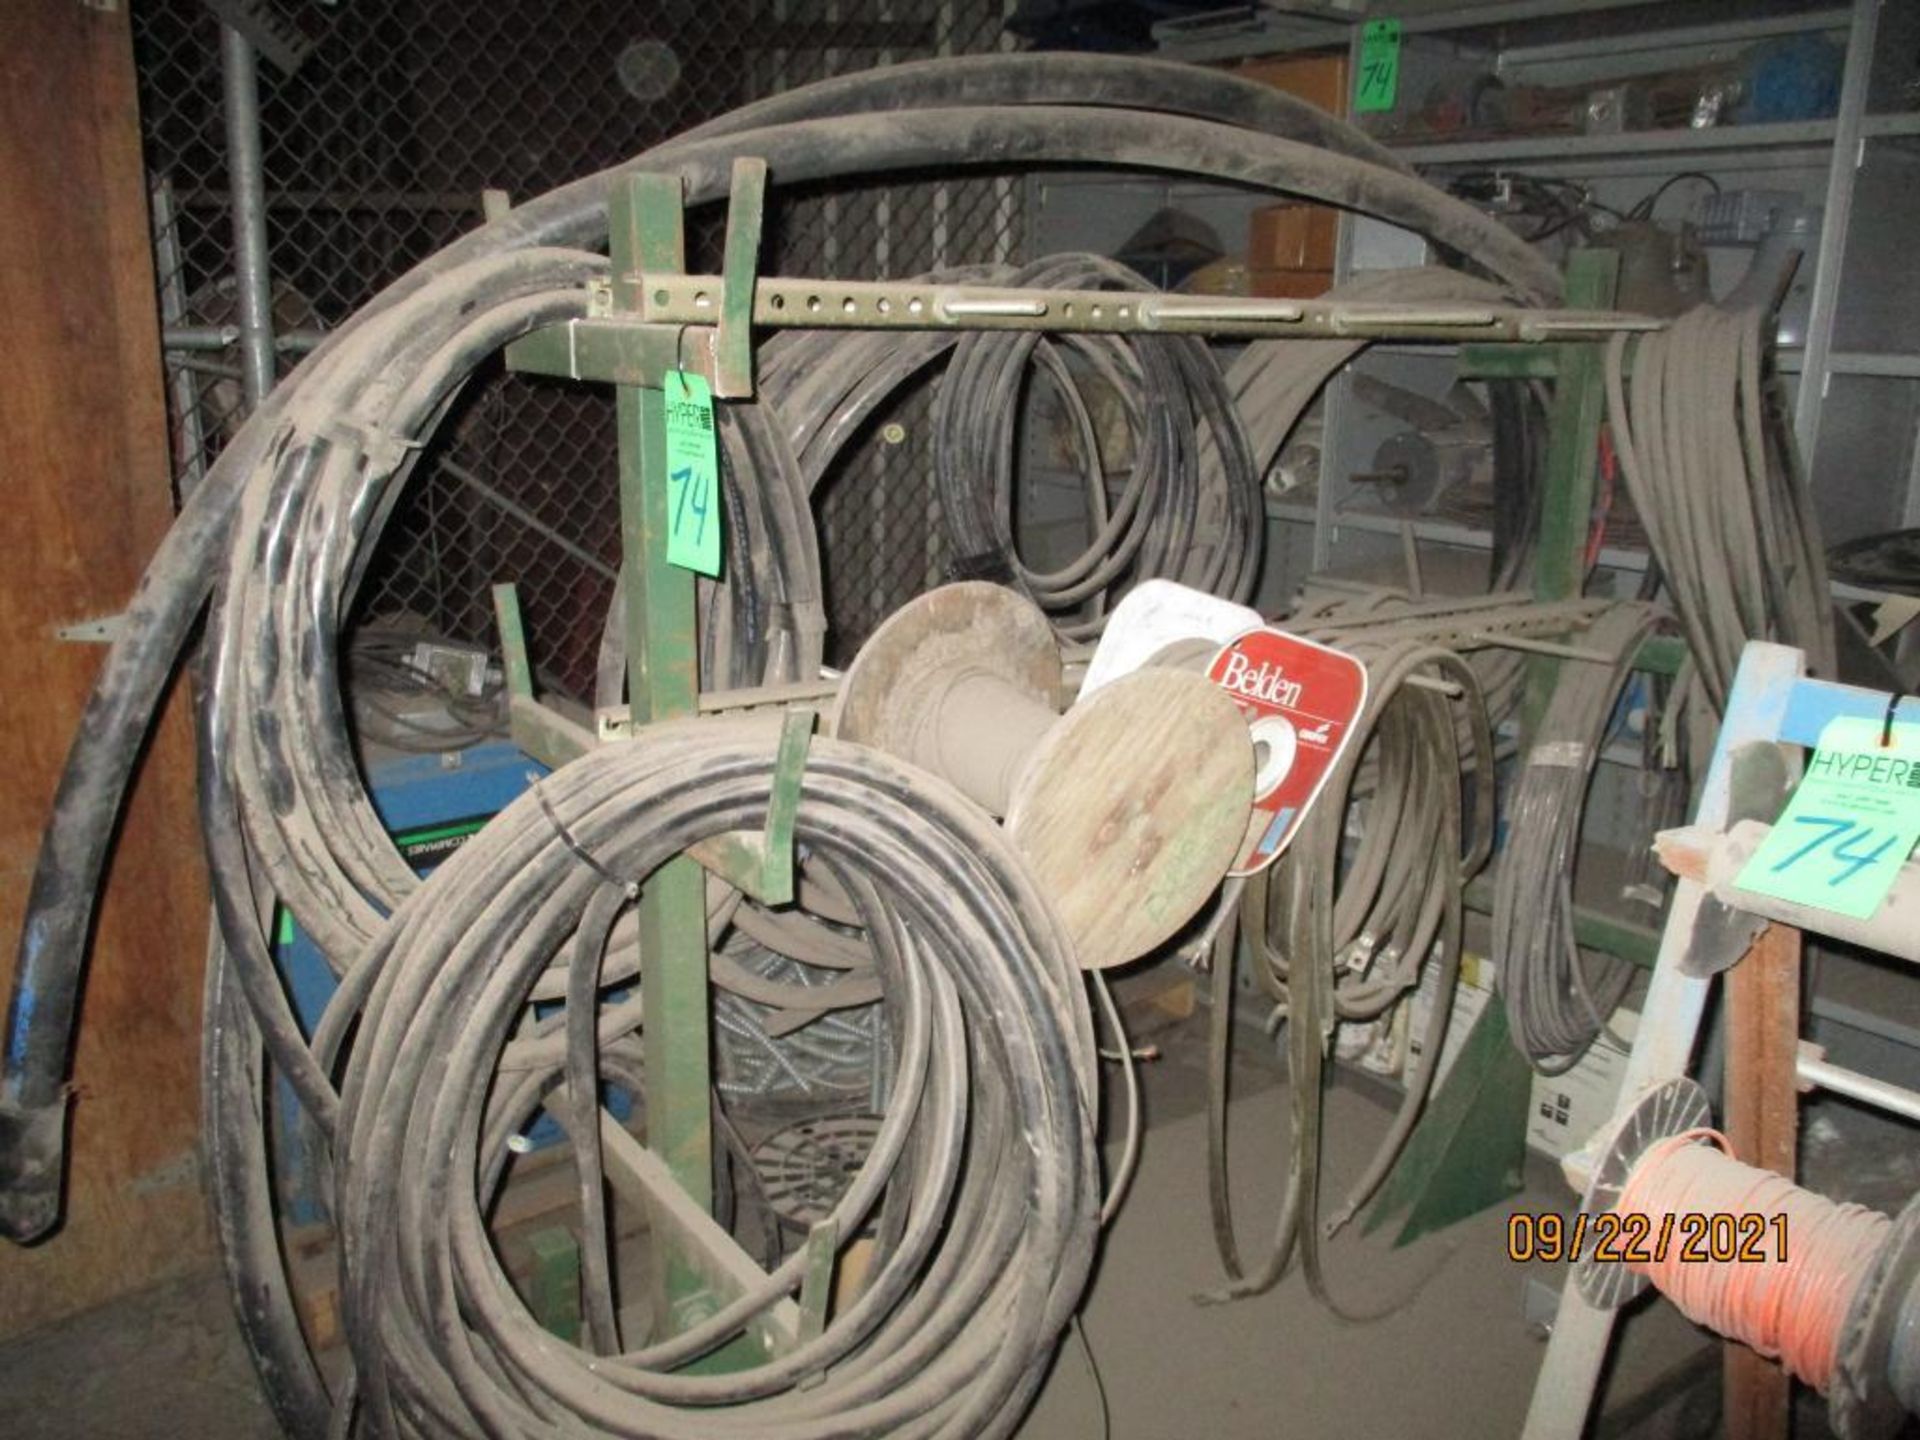 Lot c/o: Large Quantity Of Assorted Electrical Wire With Some Boxes, Located In Upstairs Mezzanine - Image 5 of 17